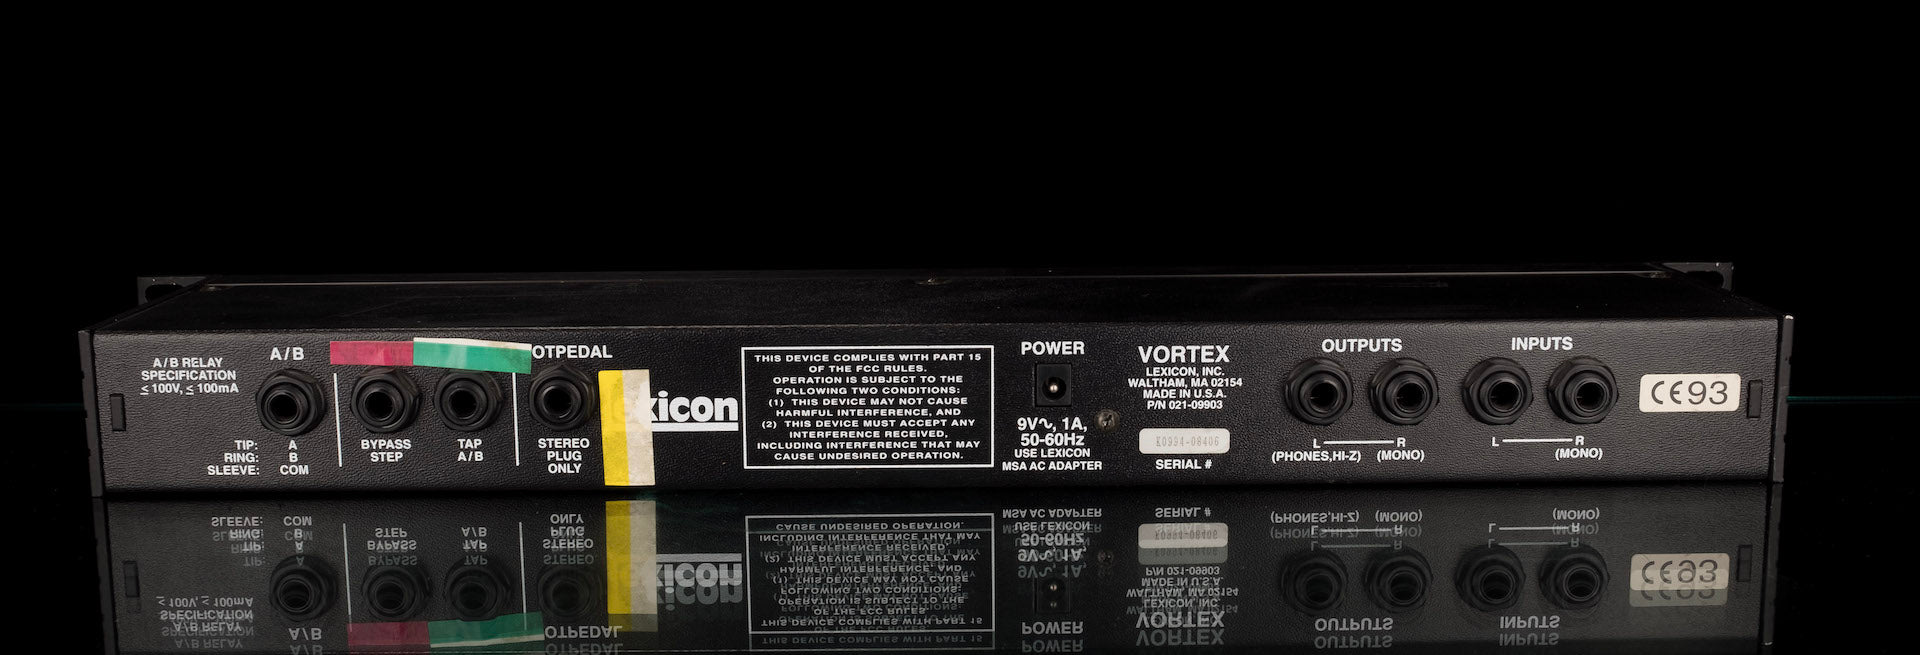 Pre Owned Lexicon Vortex Audio Morphing Processor Rack Unit with Footswitches and Power Supply